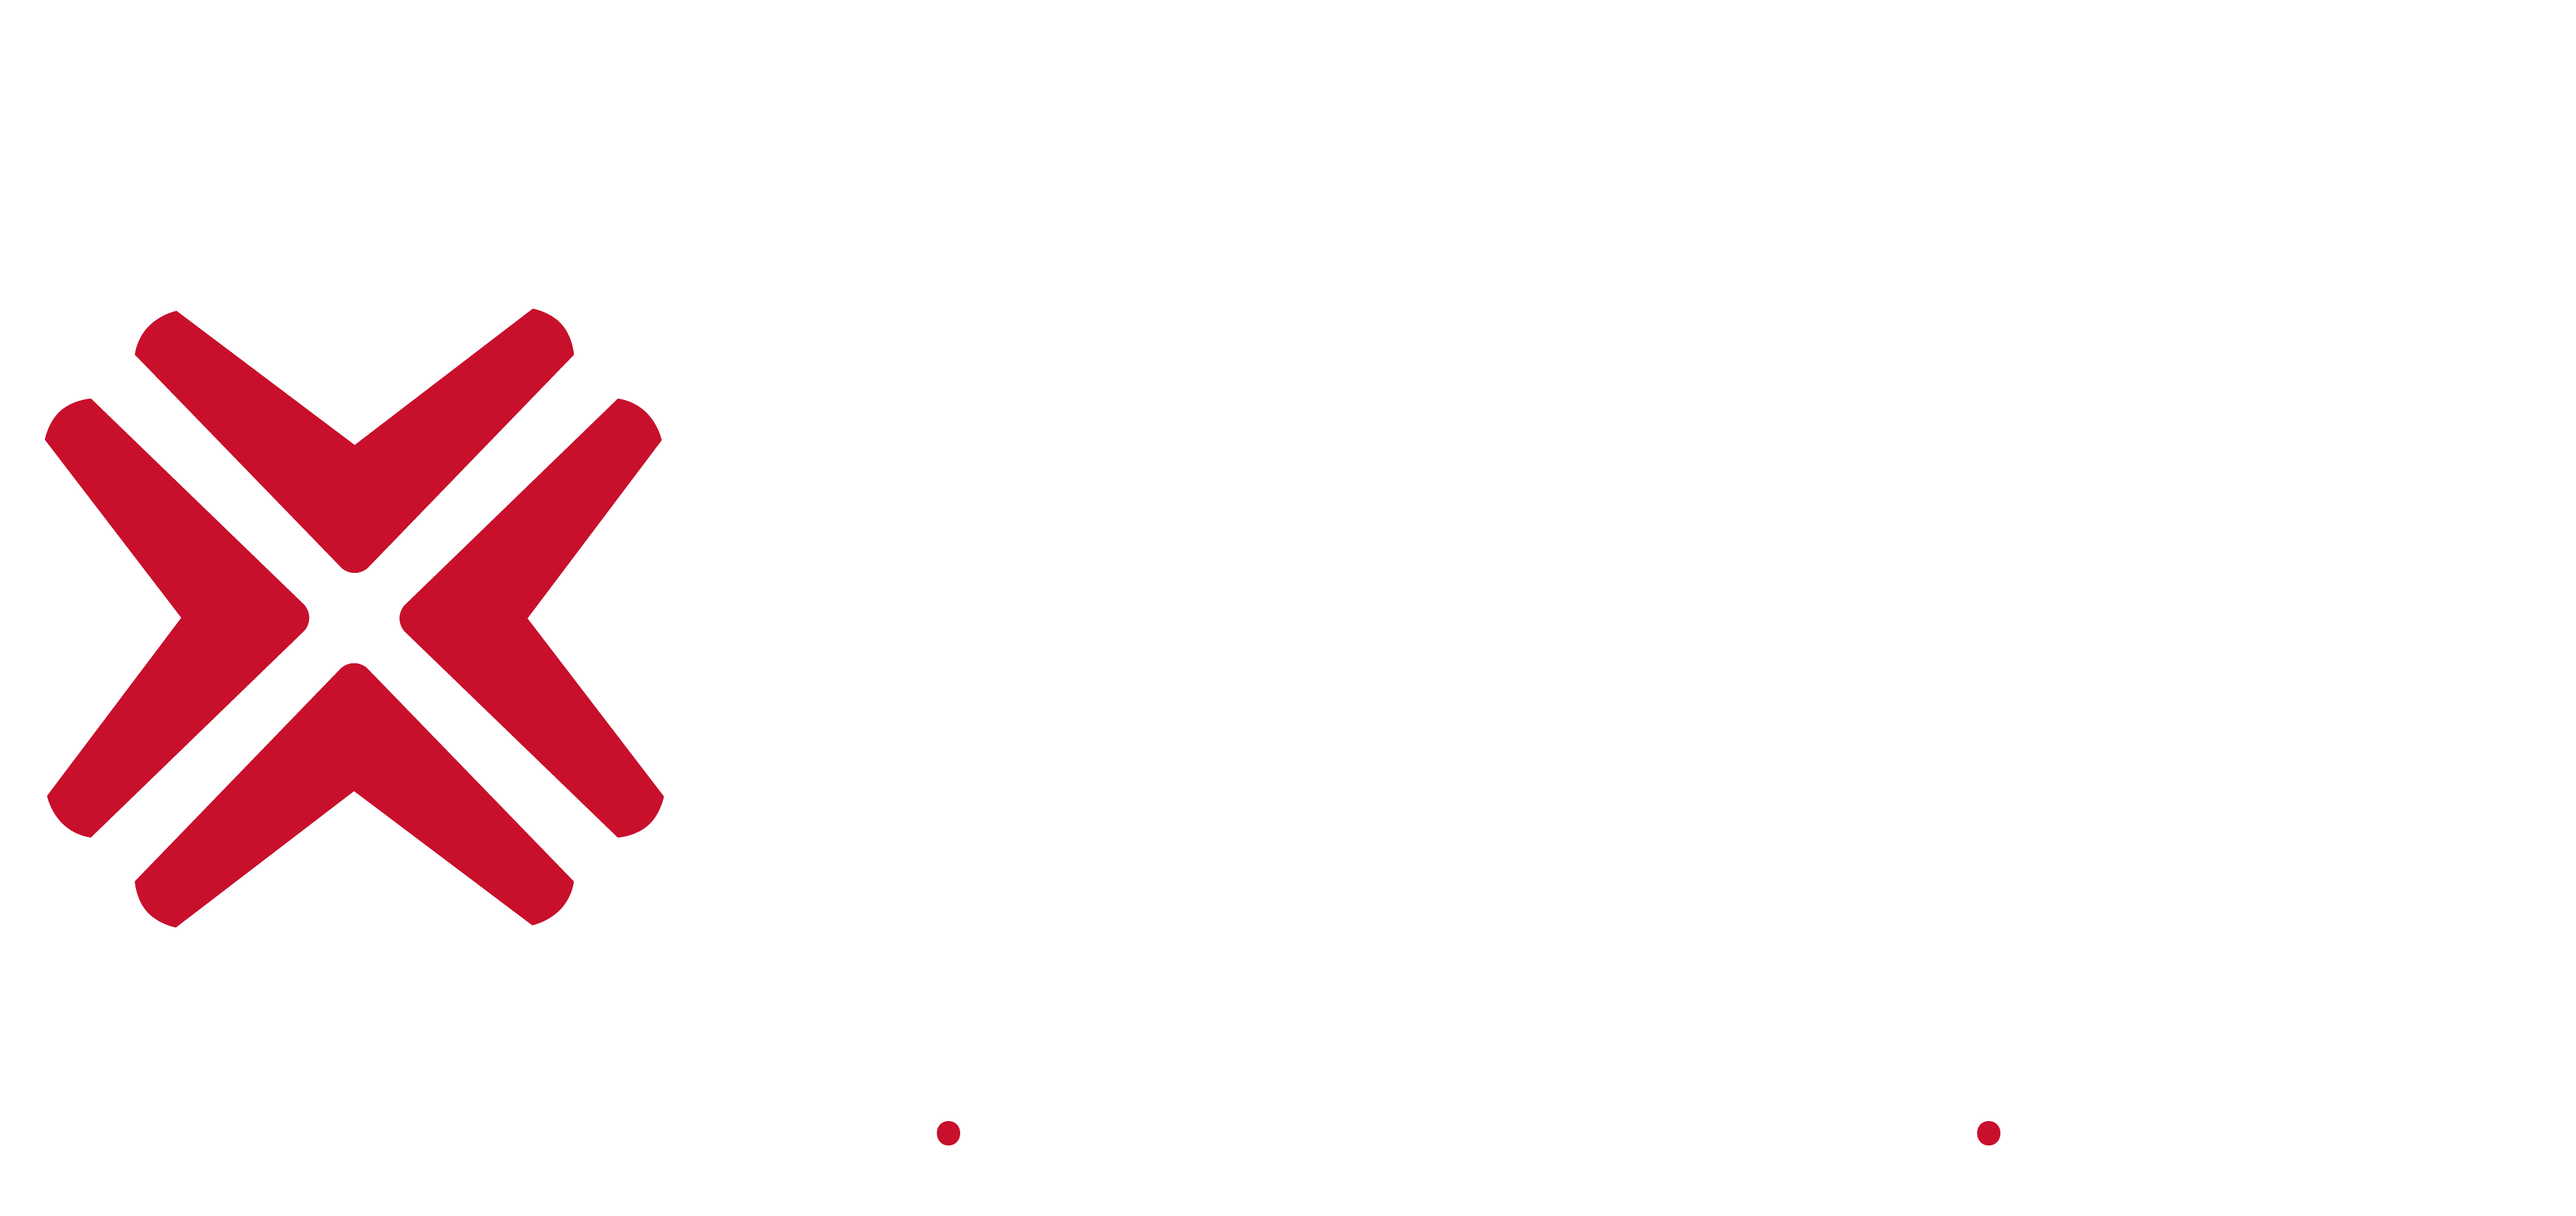 Btc congresses conventions events cryptocurrency group names